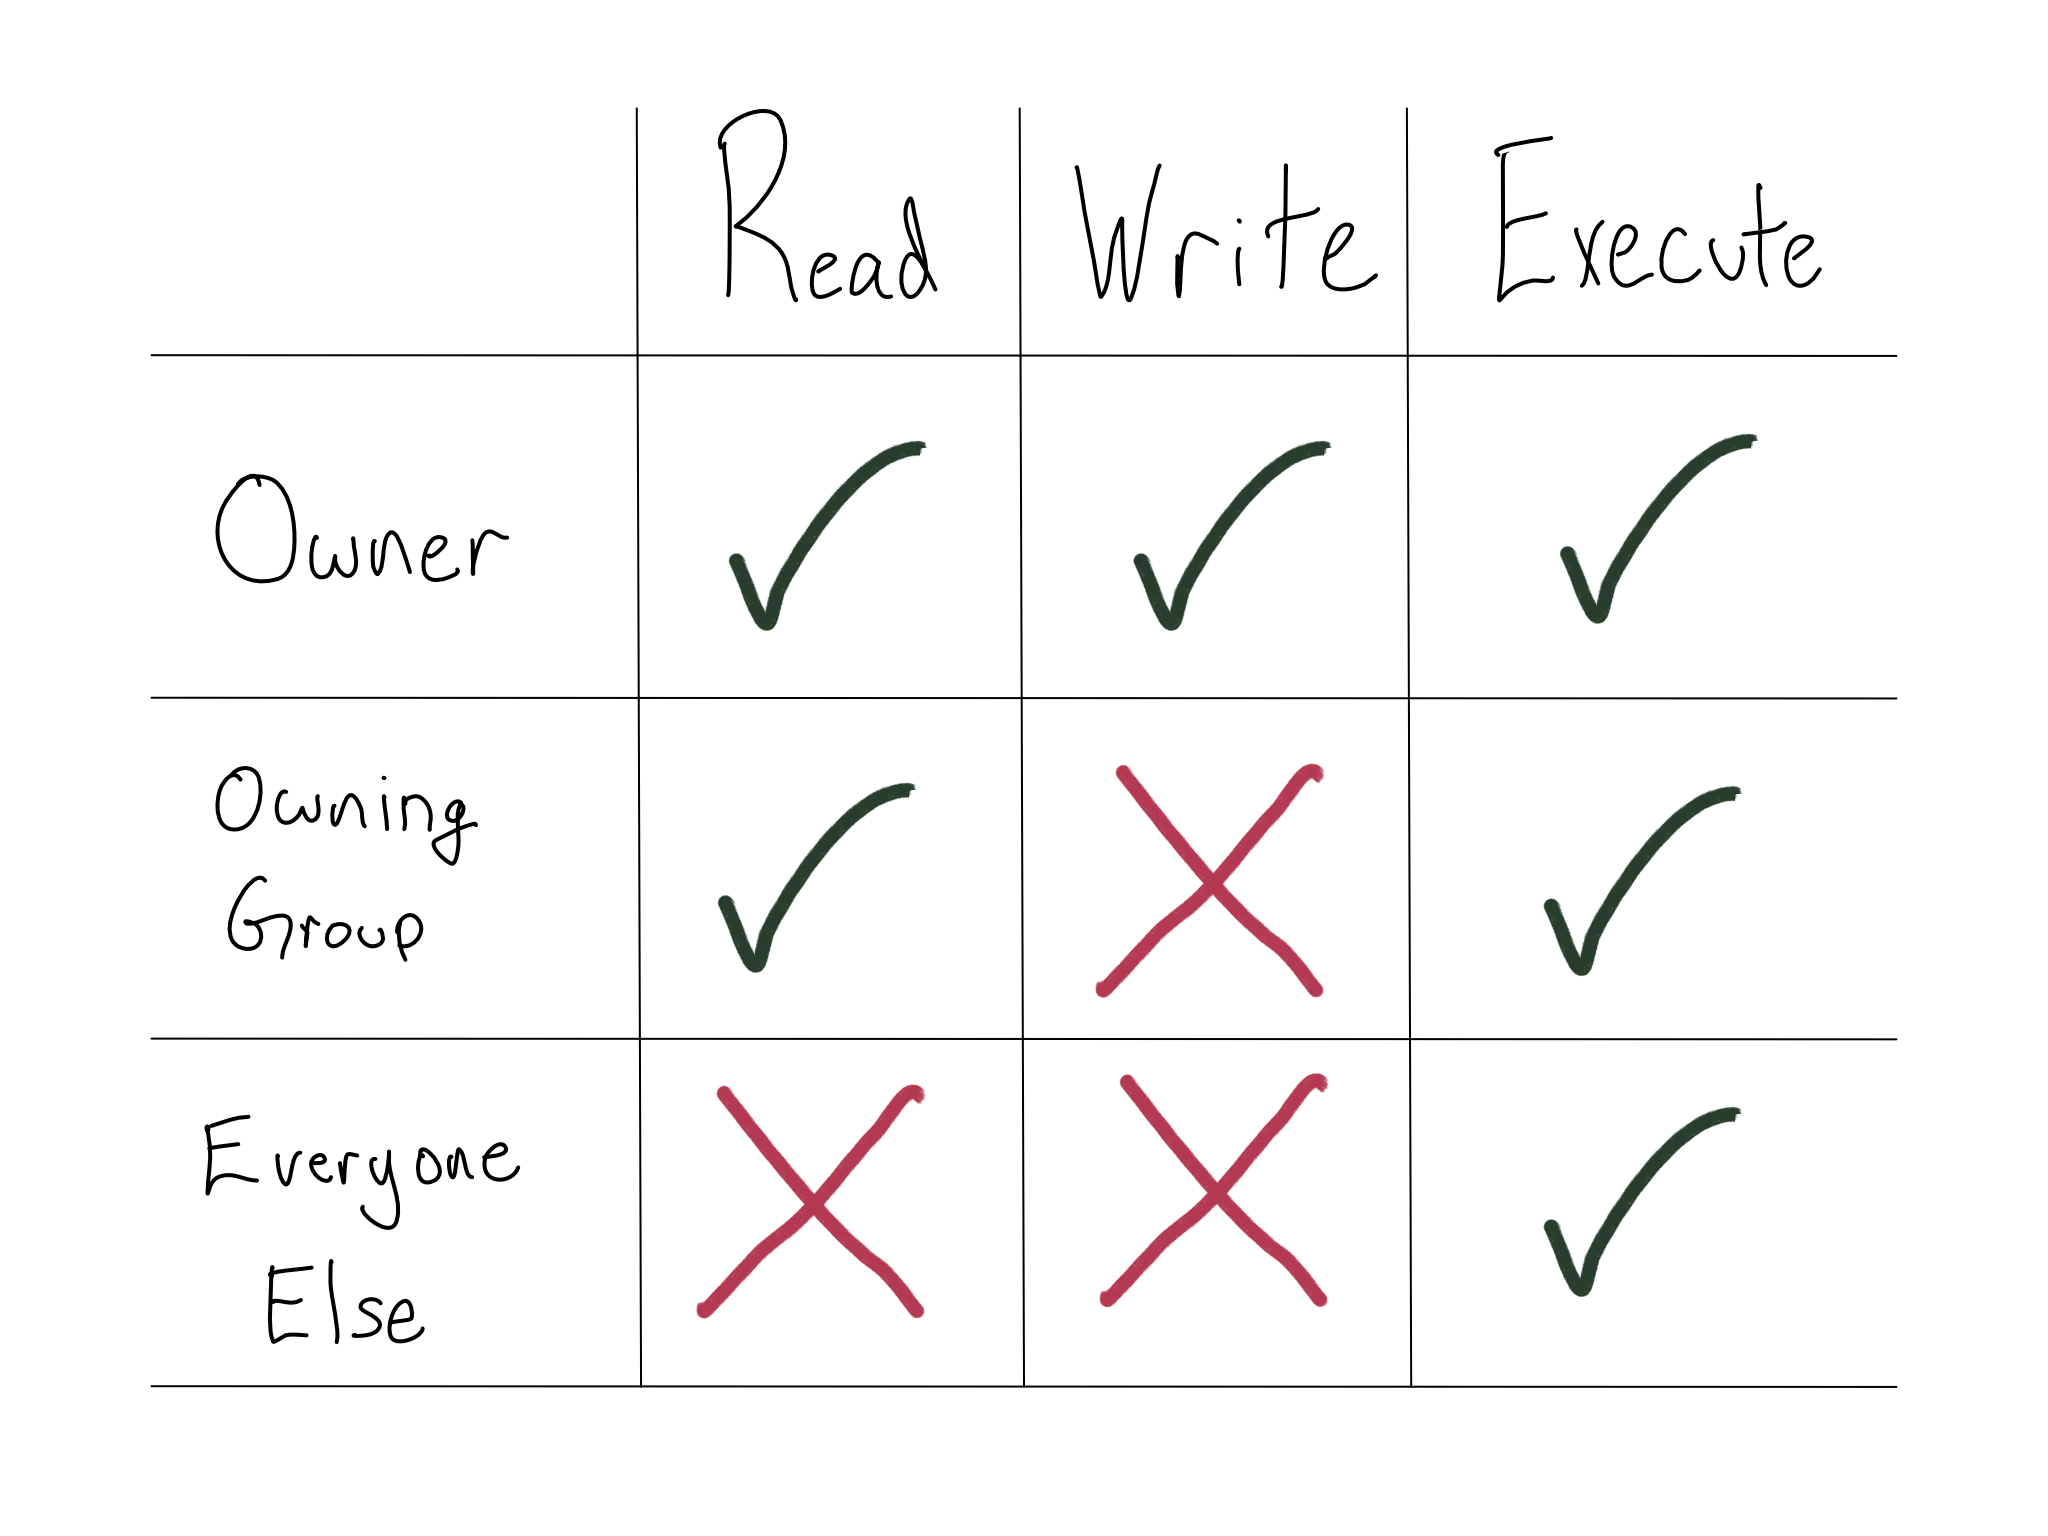 A 3x3 grid read, write, execute, on one side and owner, owning group, and everyone else at the top. Green checks in all of the execute, write for the owner, and read for owner and owning group. Red xs everywhere else.